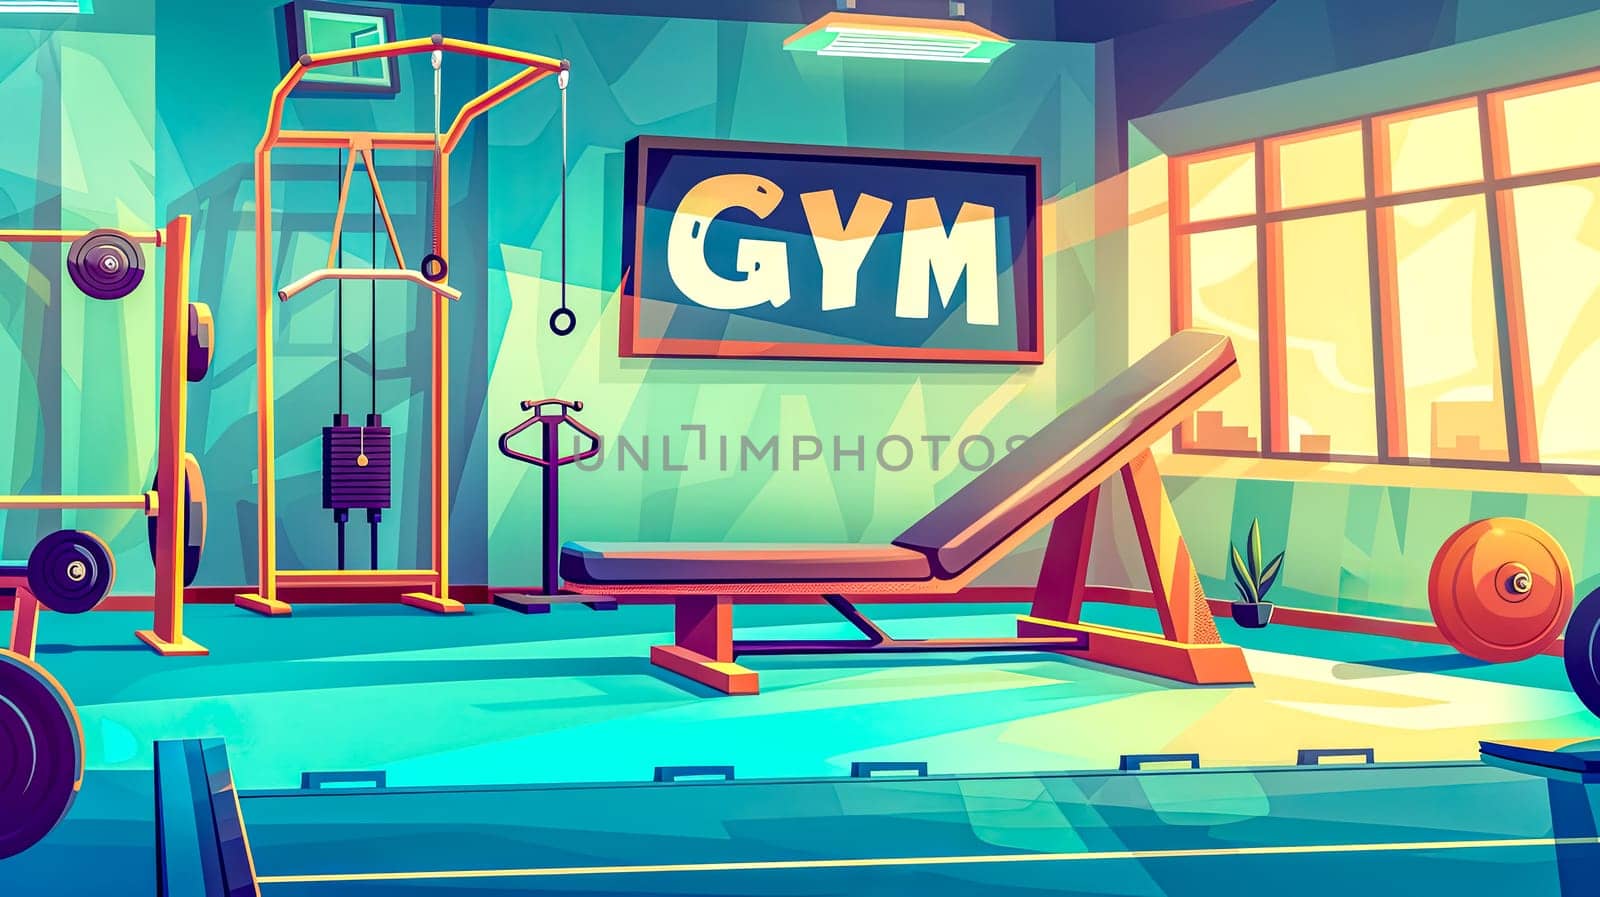 Colorful illustration of an empty, high-tech gym interior with digital screen